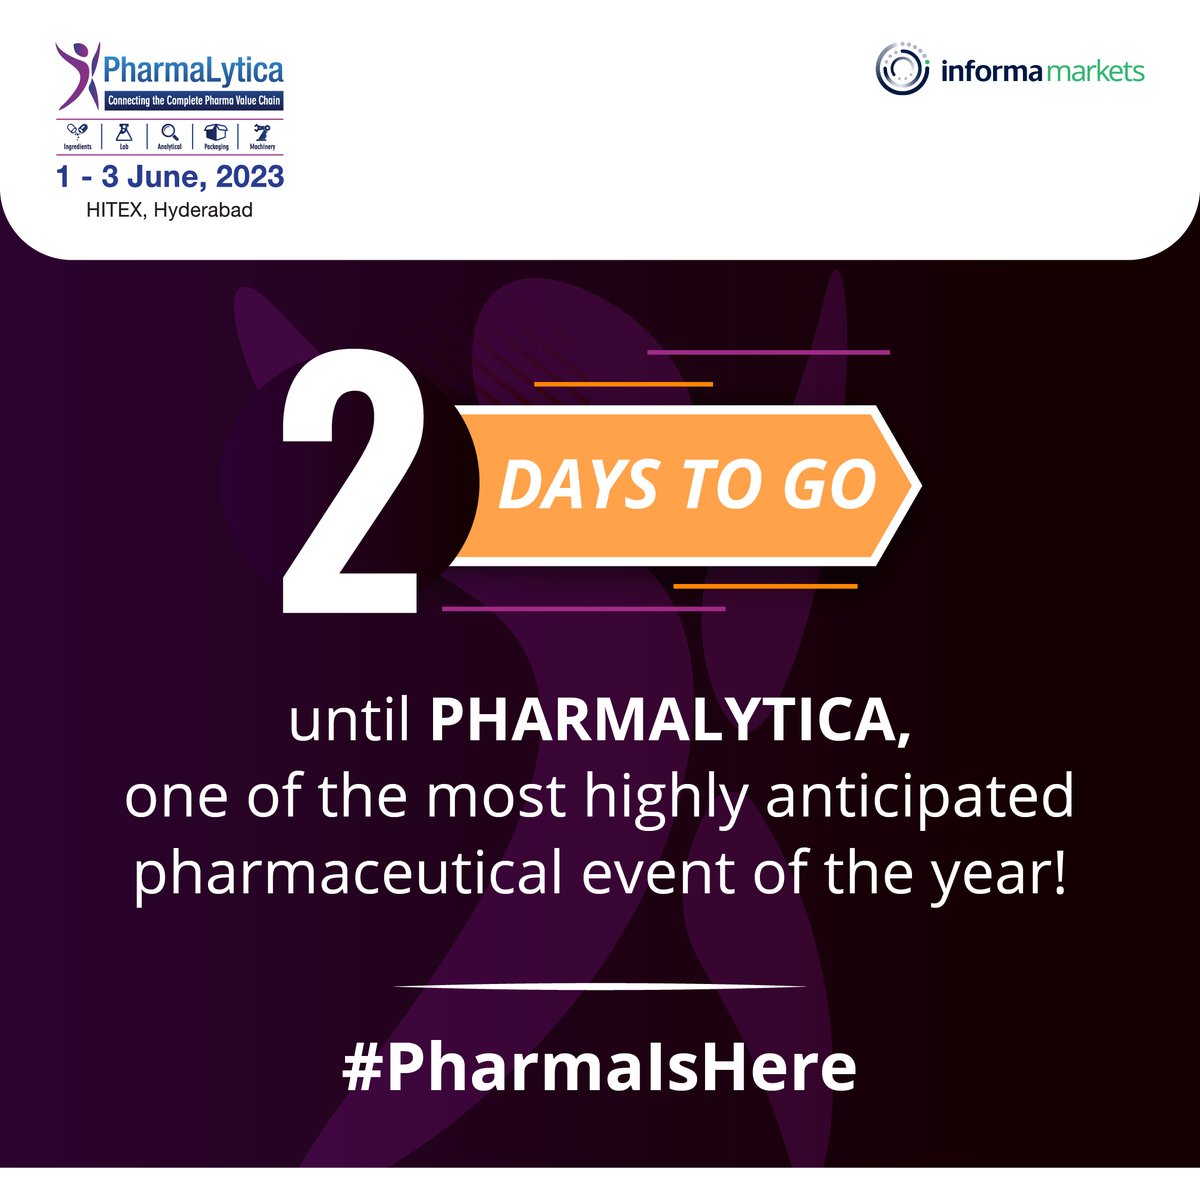 Pharmalytica is your gateway to a world of possibilities in the pharmaceutical realm. With just 48 hours remaining, make sure you don't miss out on the exceptional opportunities that await you.​

#PharmaIsHere #PharmaceuticalIndustry #Pharmalytica #2daystogo